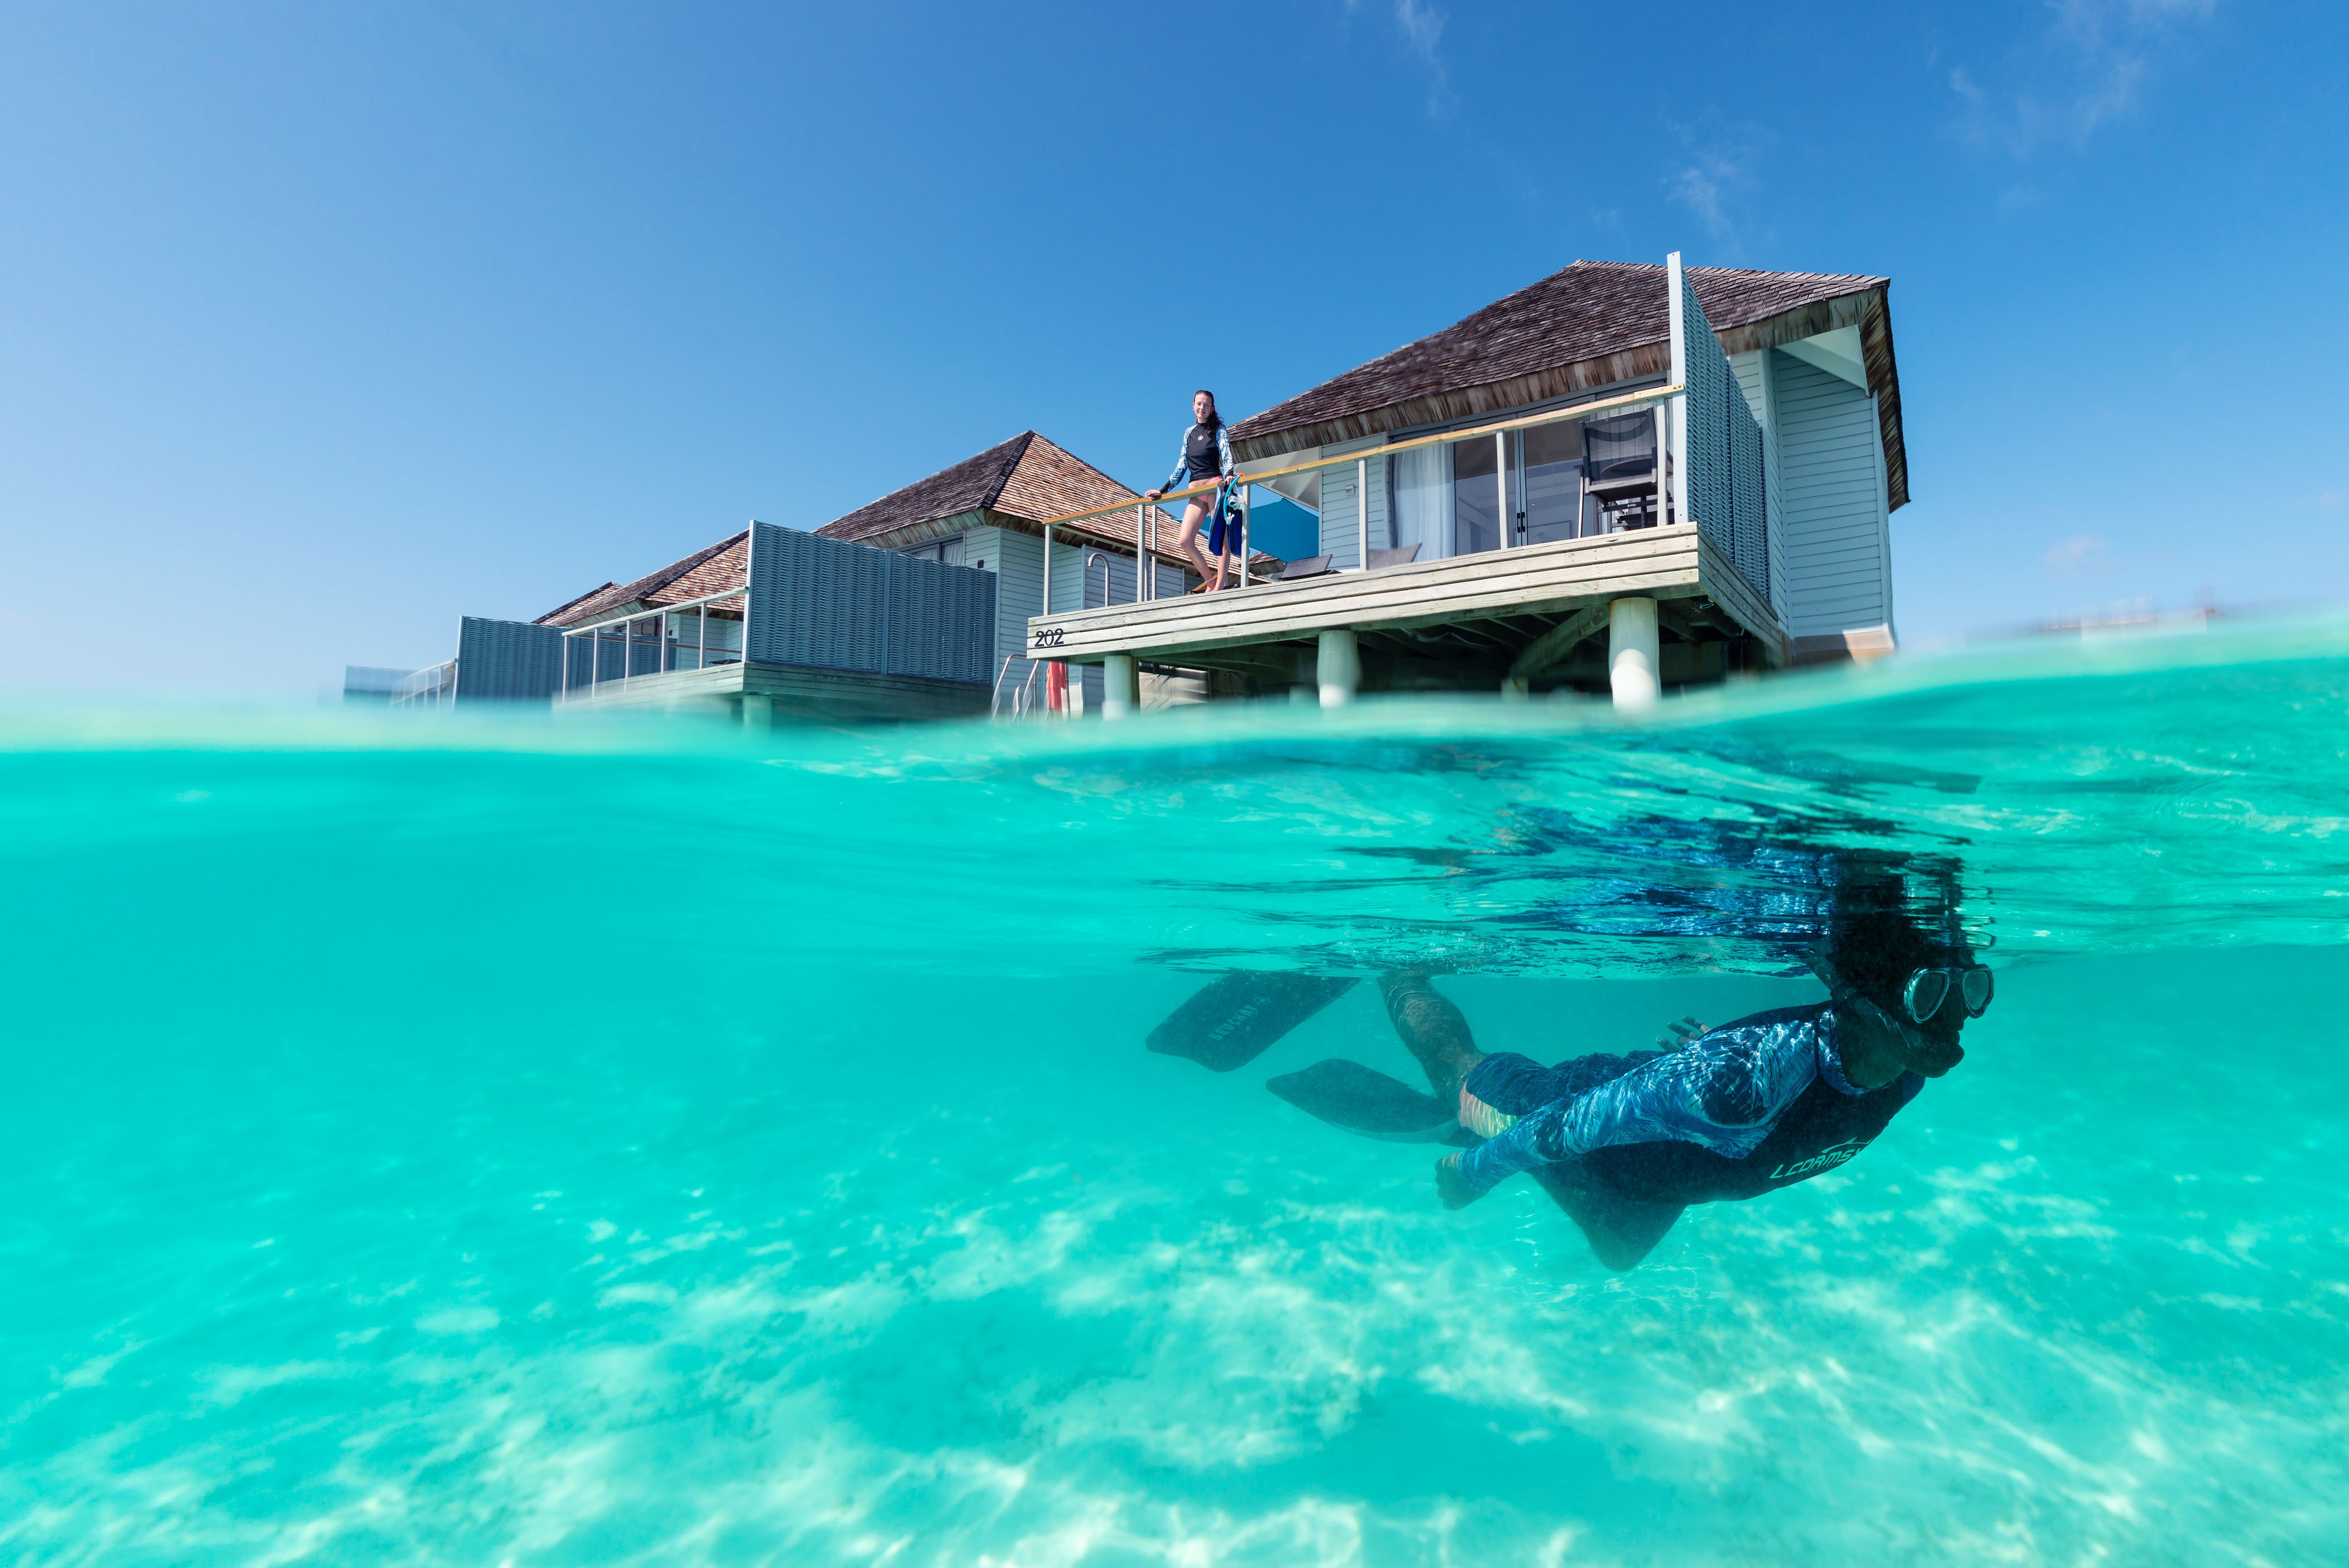 Snorkeling in the Maldives